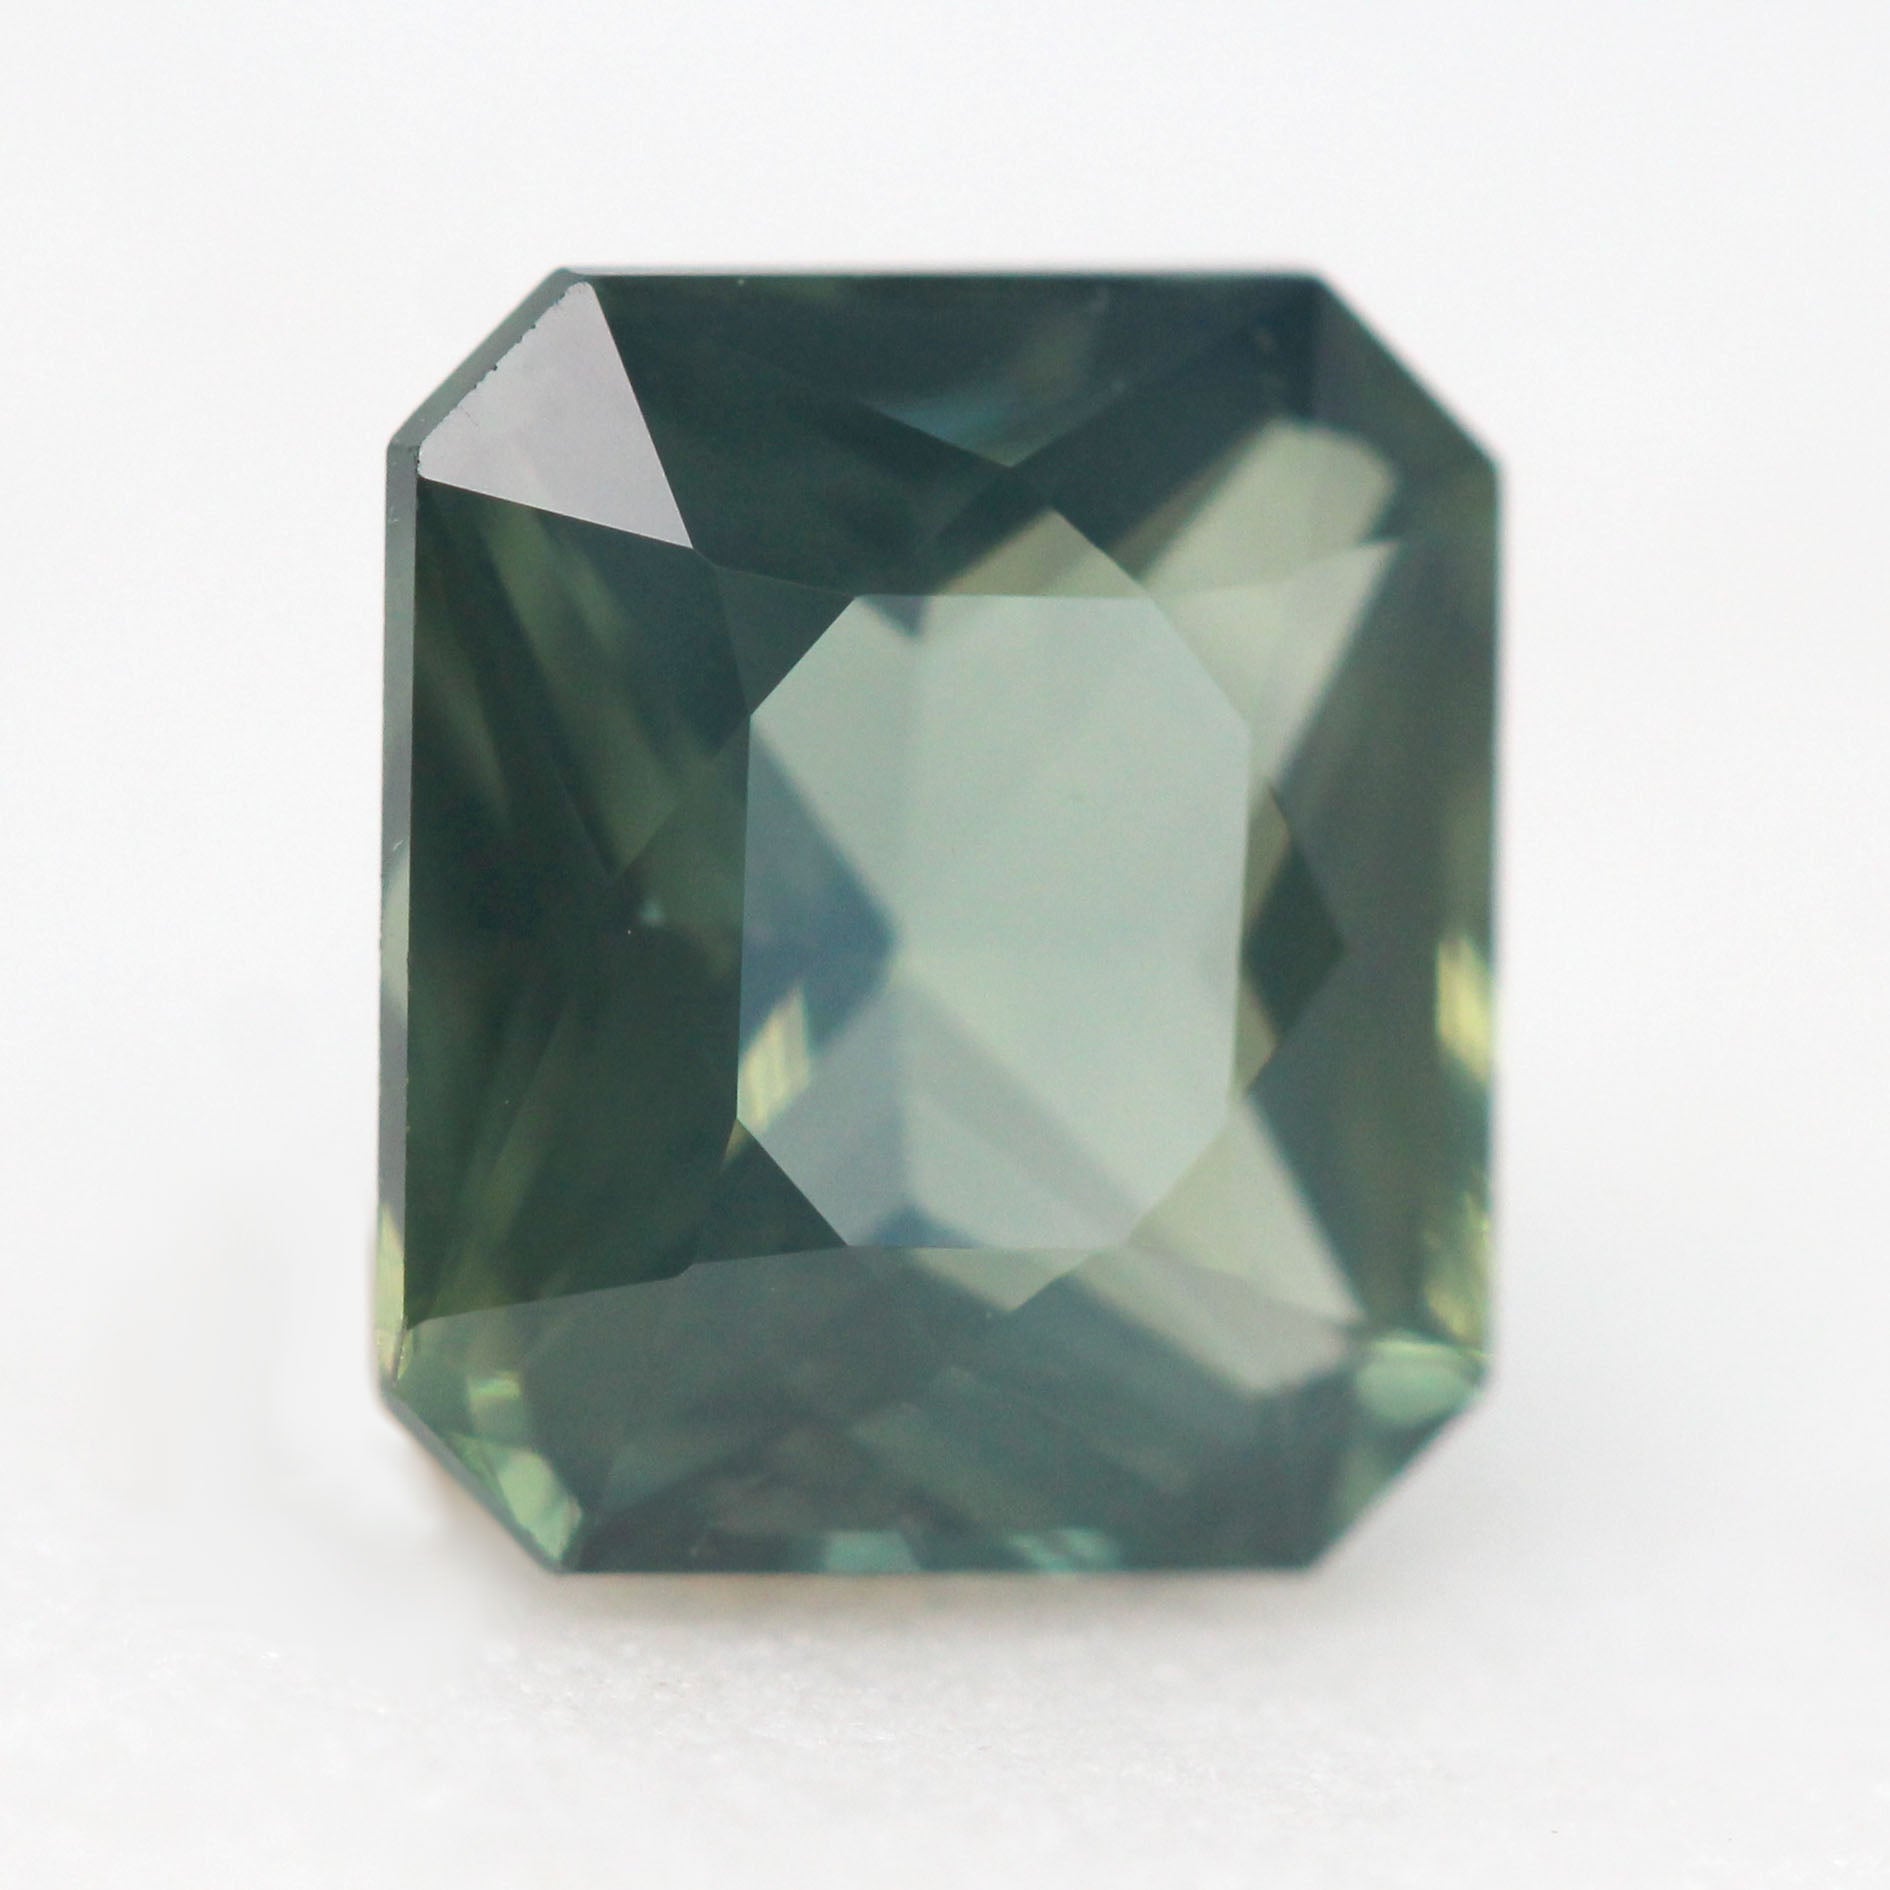 2.10 Carat Radiant Cut Teal Green Sapphire for Custom Work - Inventory Code RCTS210 - Midwinter Co. Alternative Bridal Rings and Modern Fine Jewelry